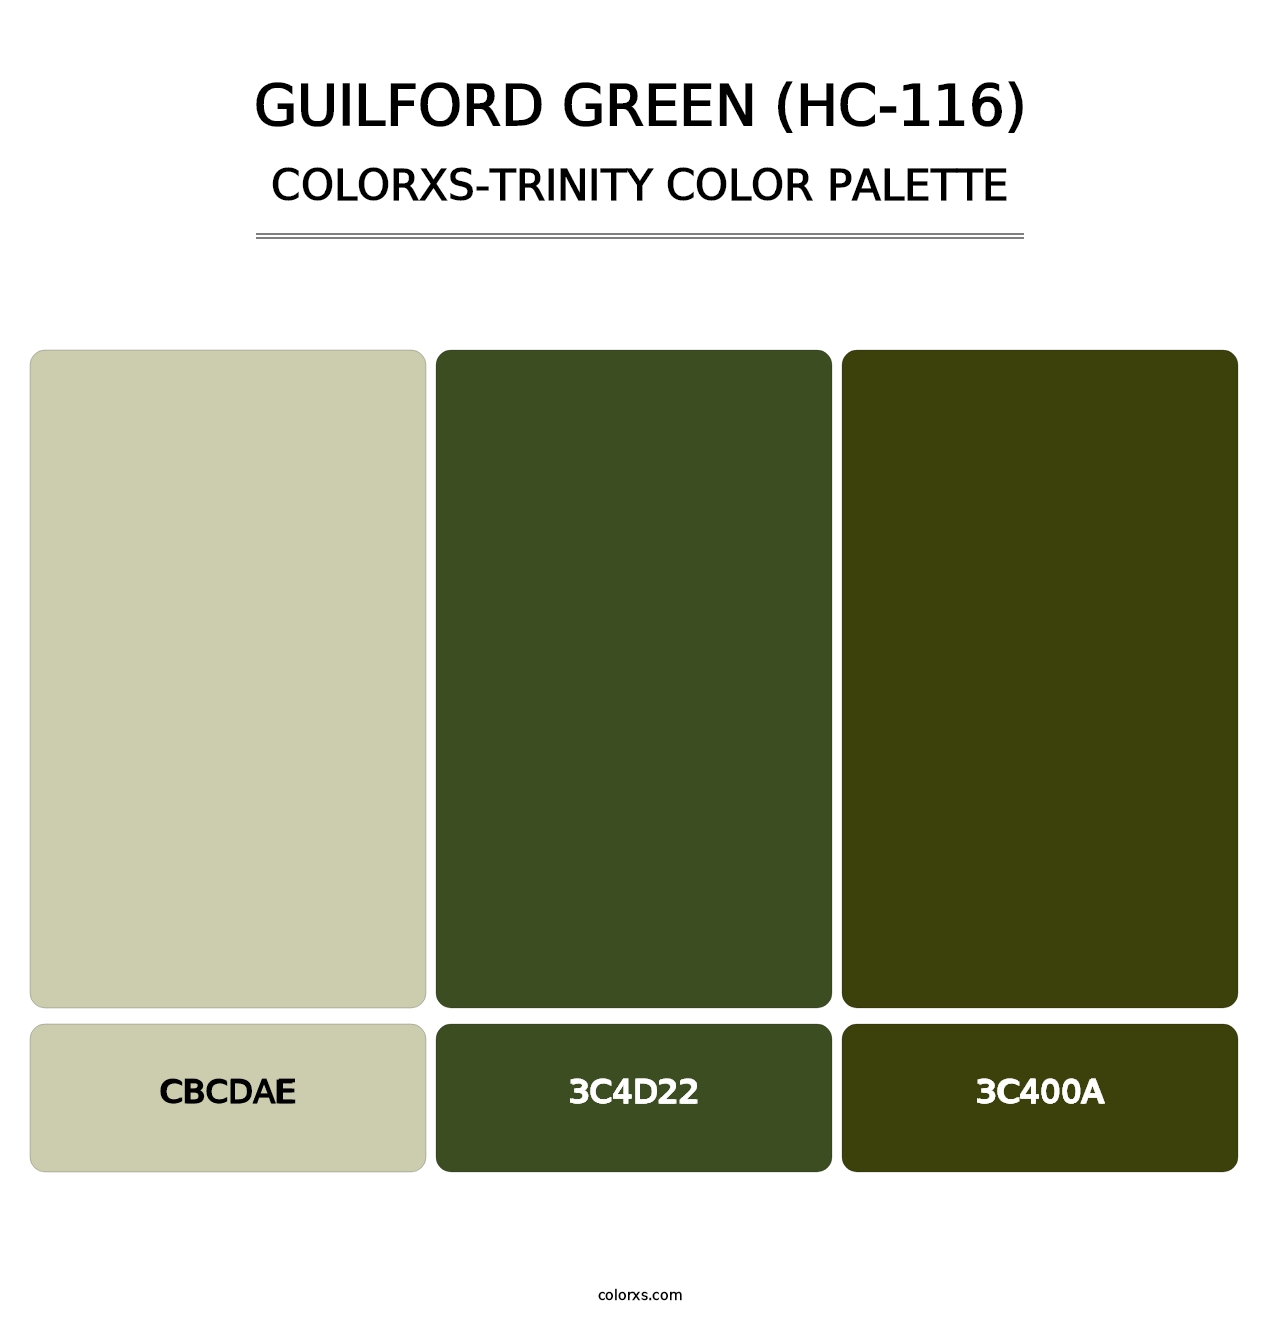 Guilford Green (HC-116) - Colorxs Trinity Palette